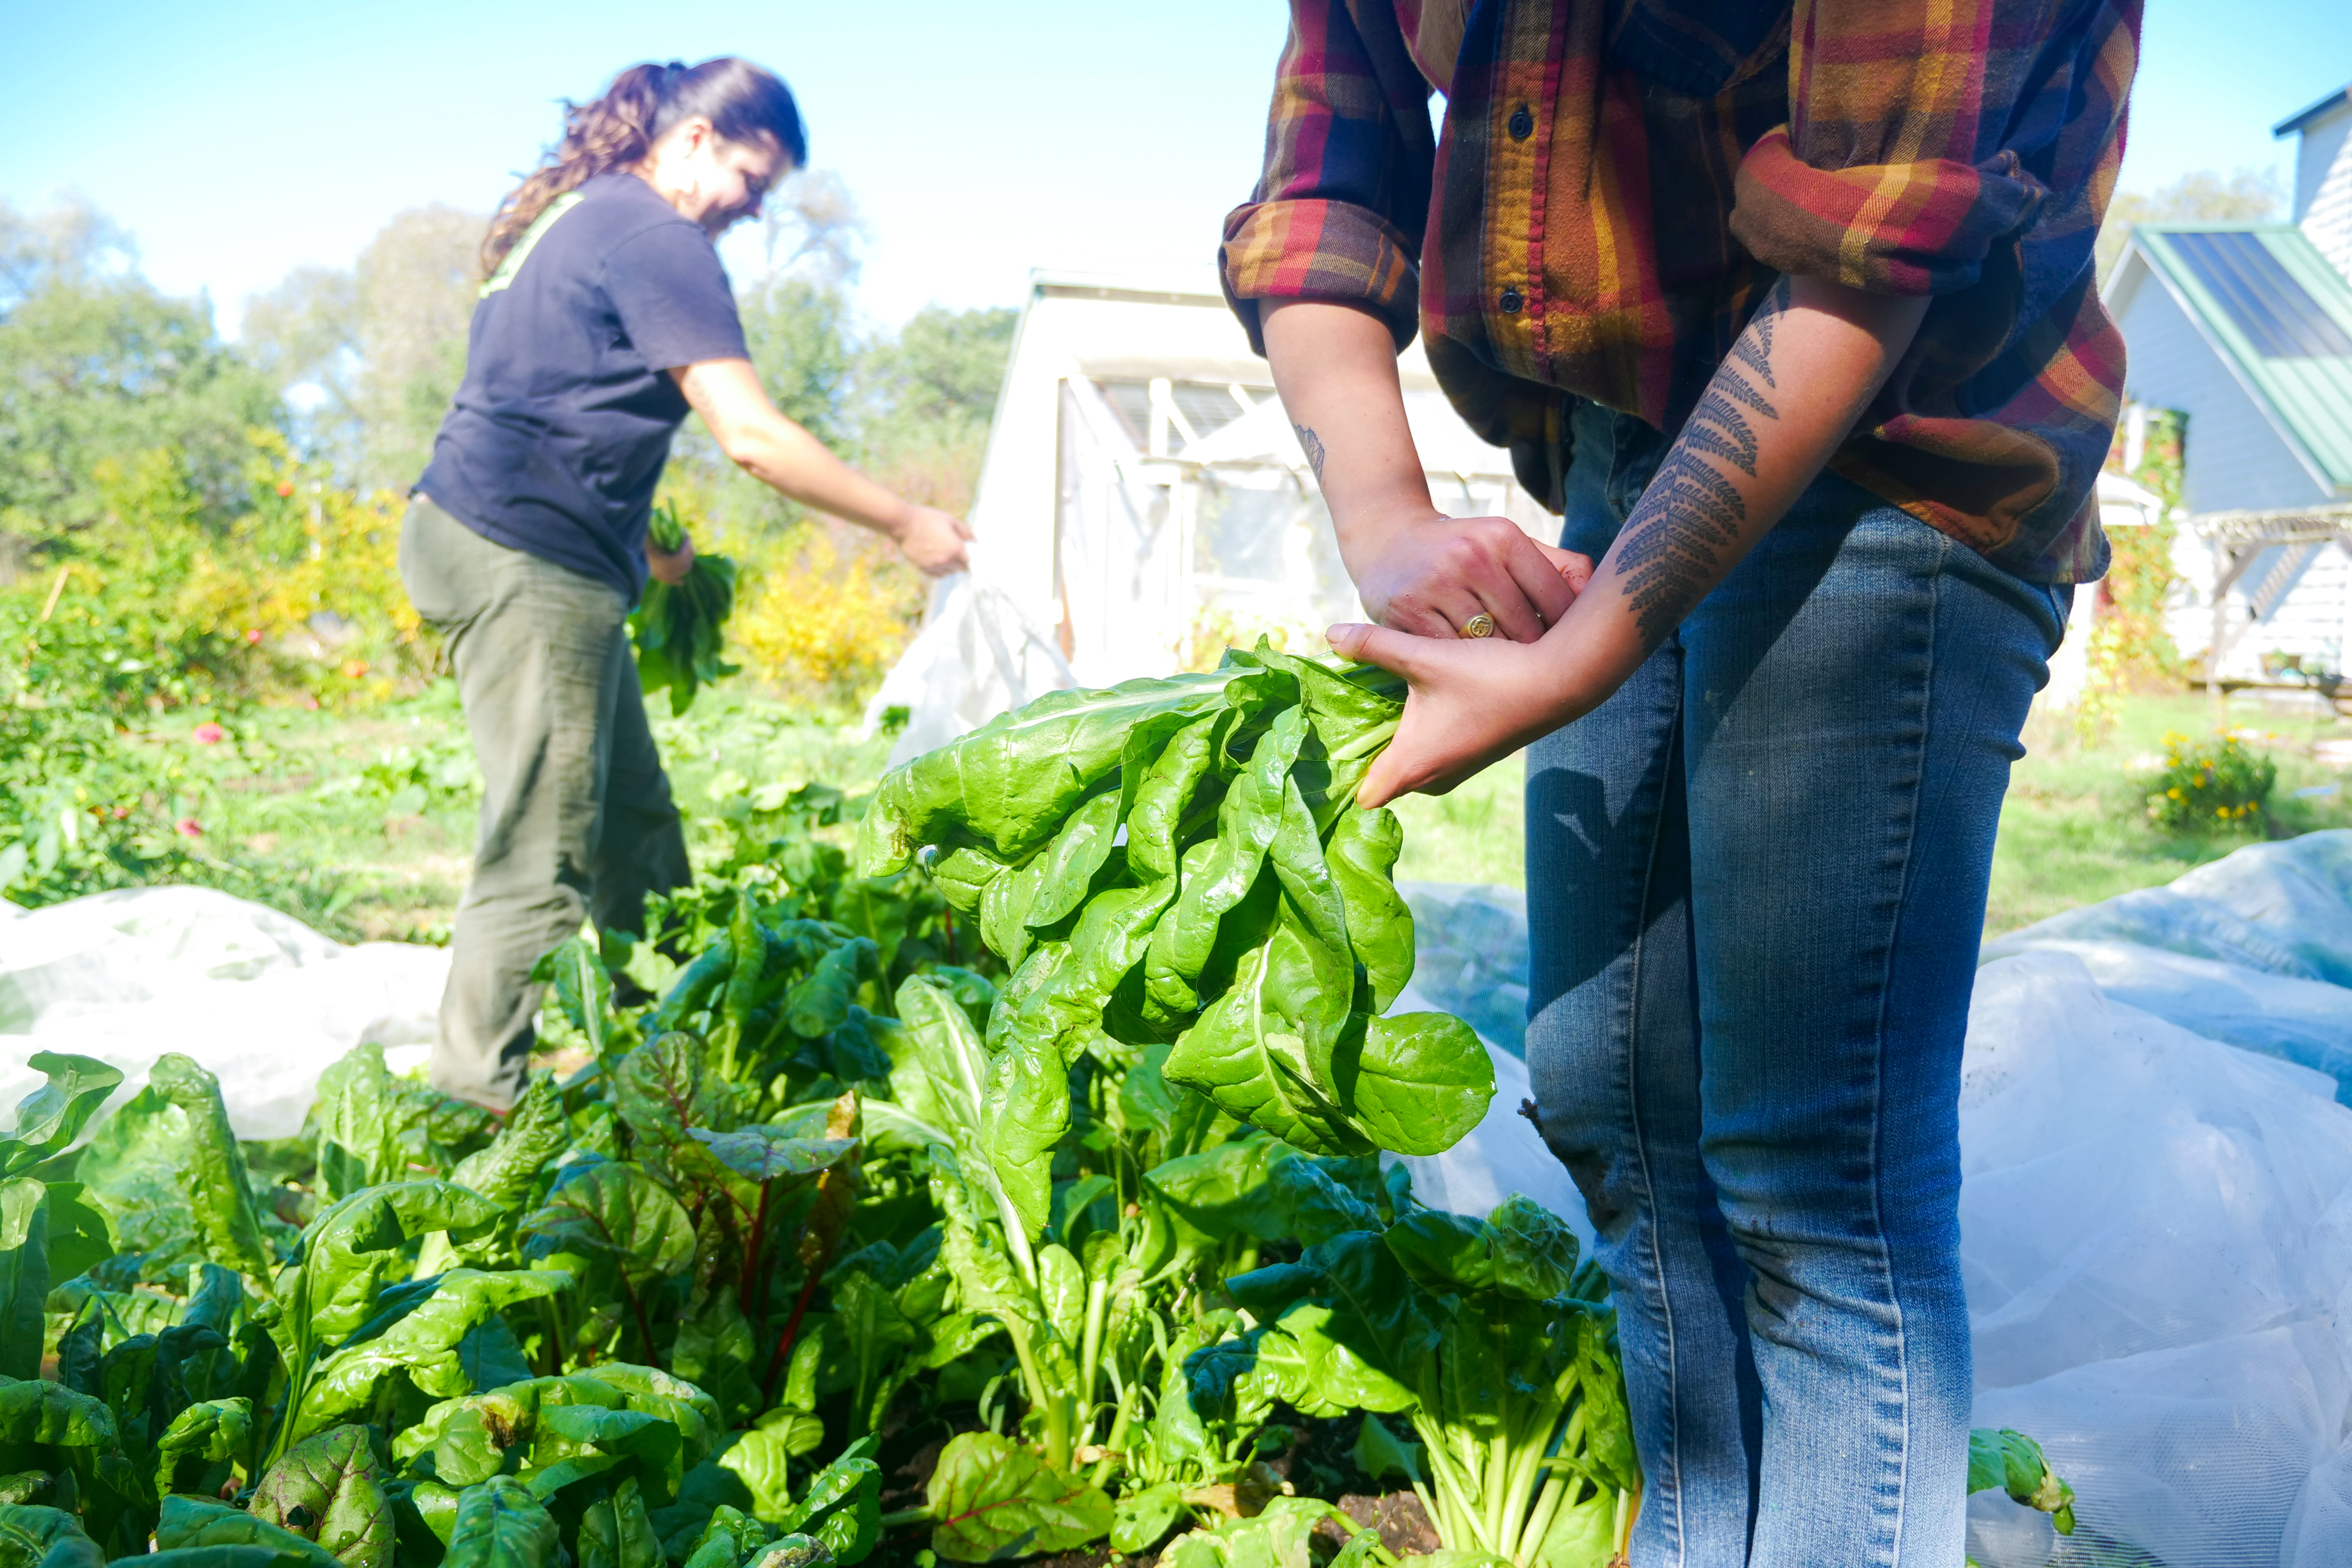 Students working in the campus garden